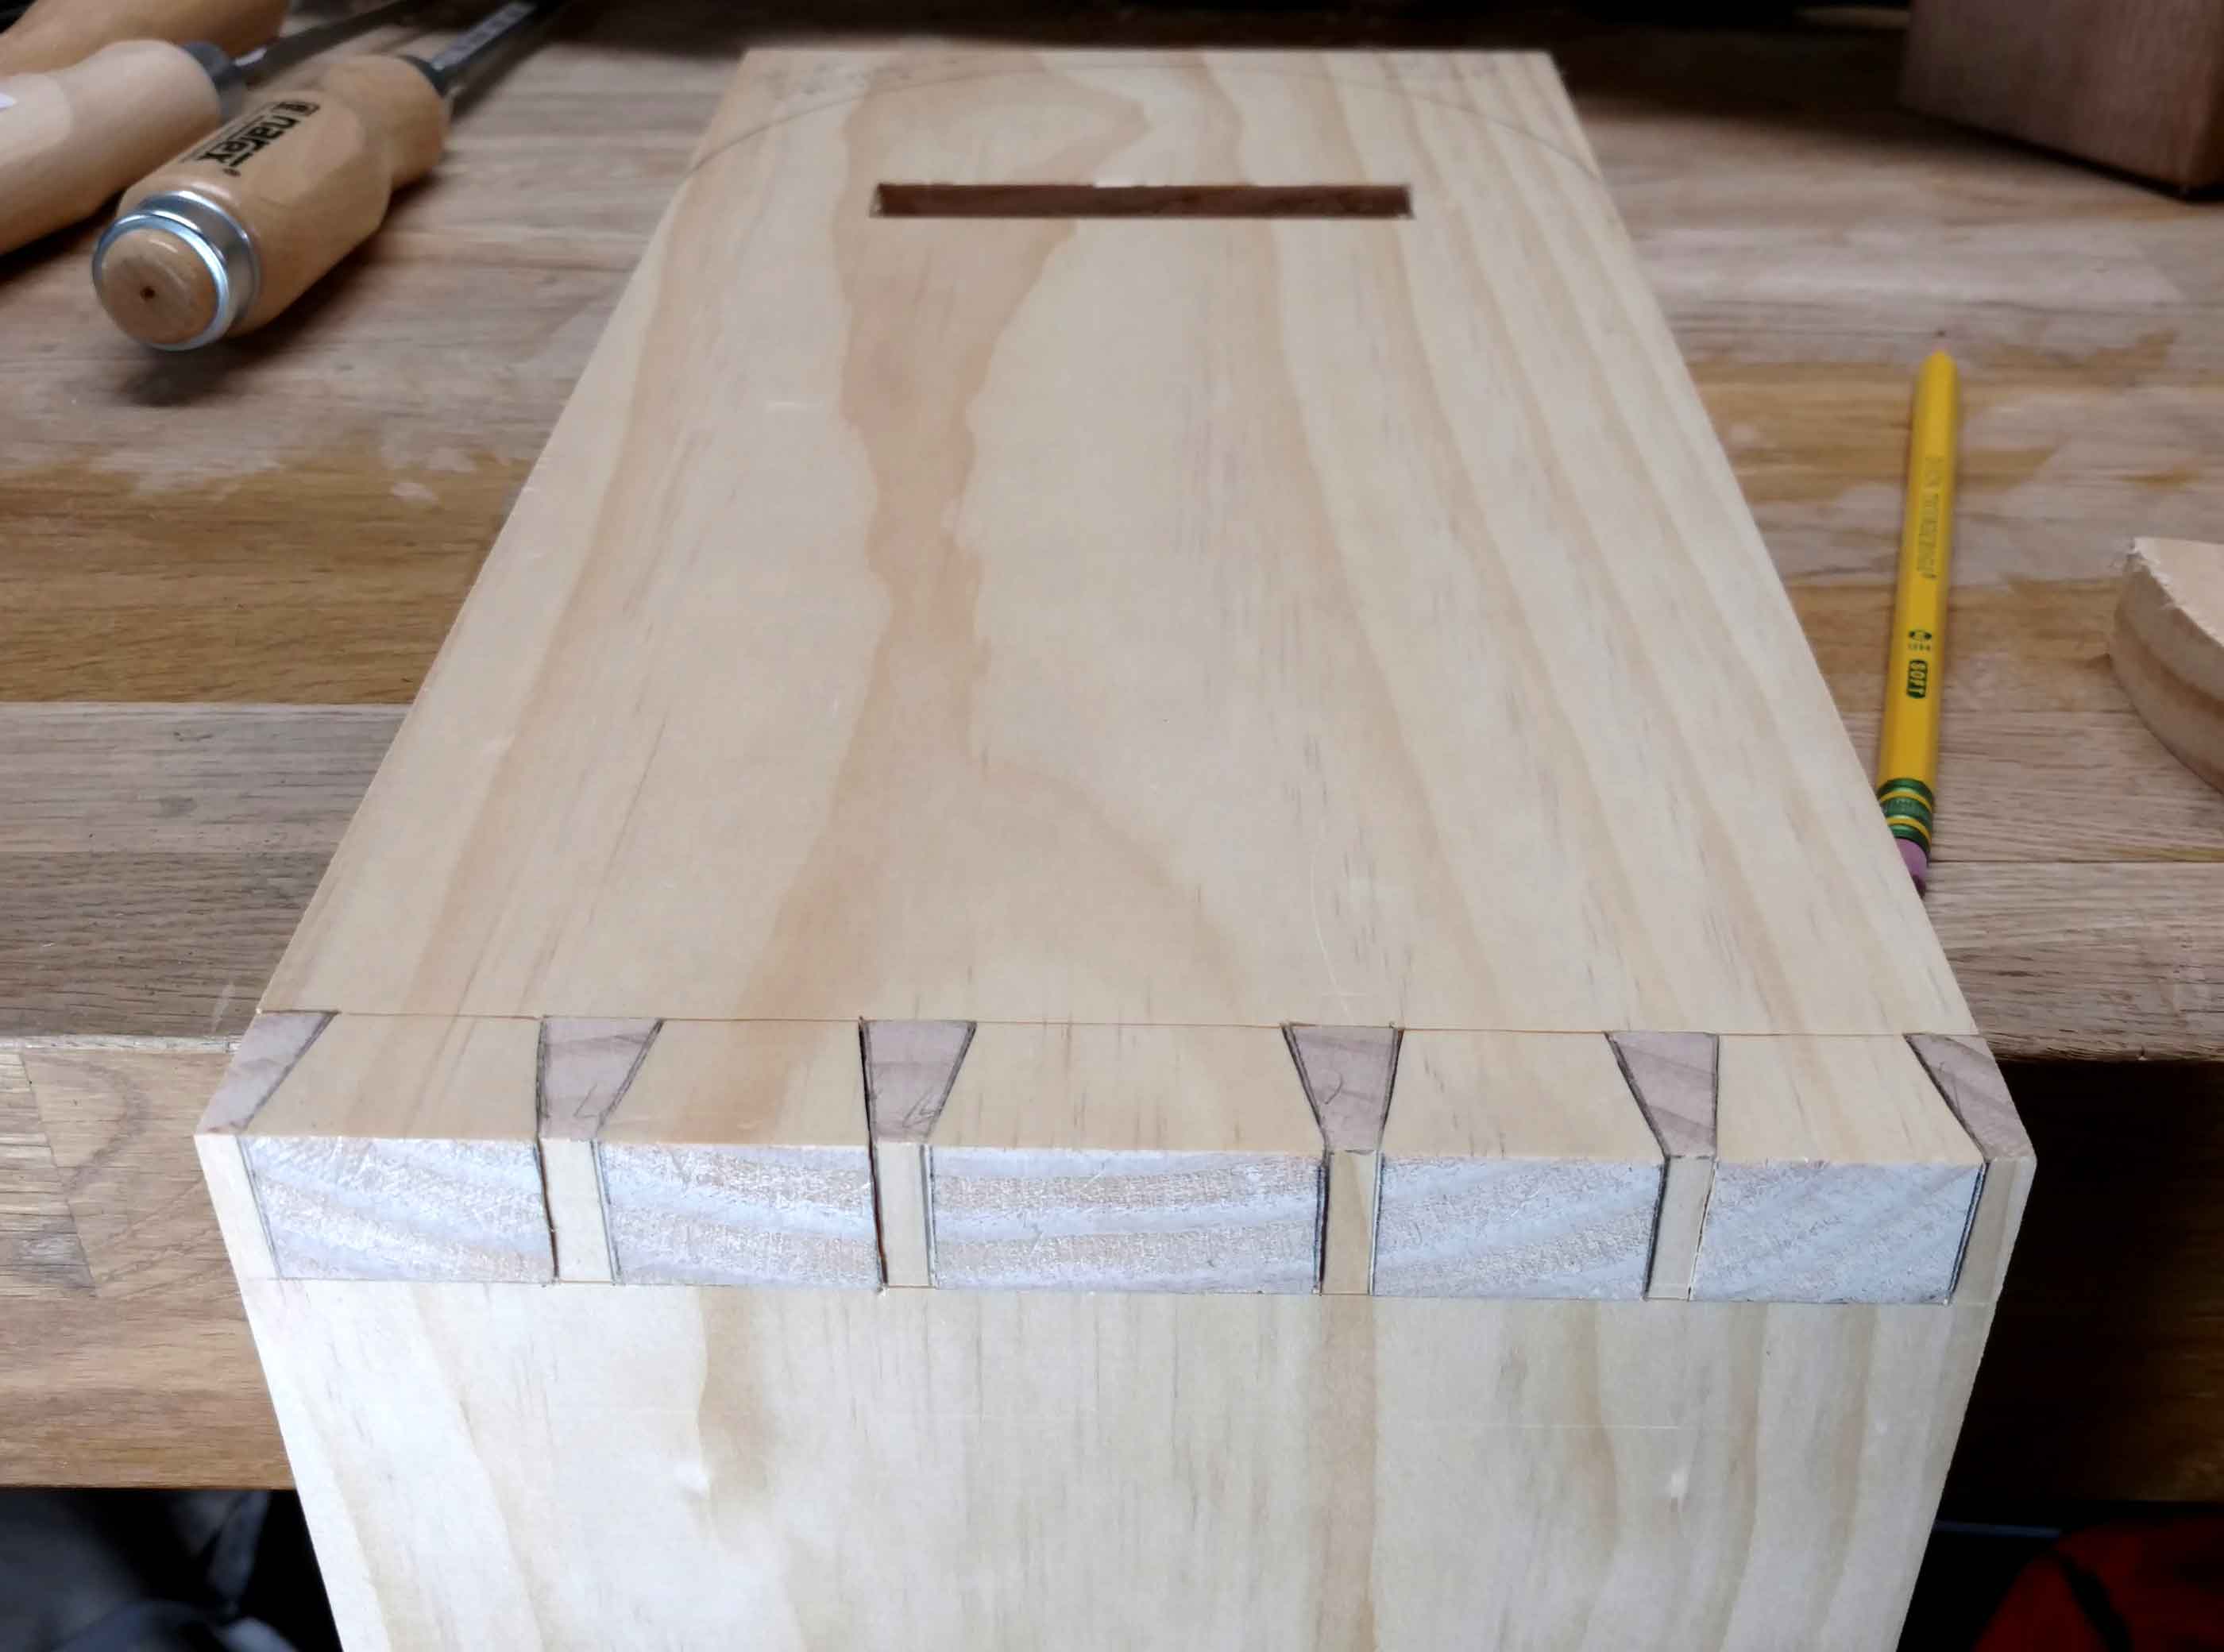 assembled dovetail joint